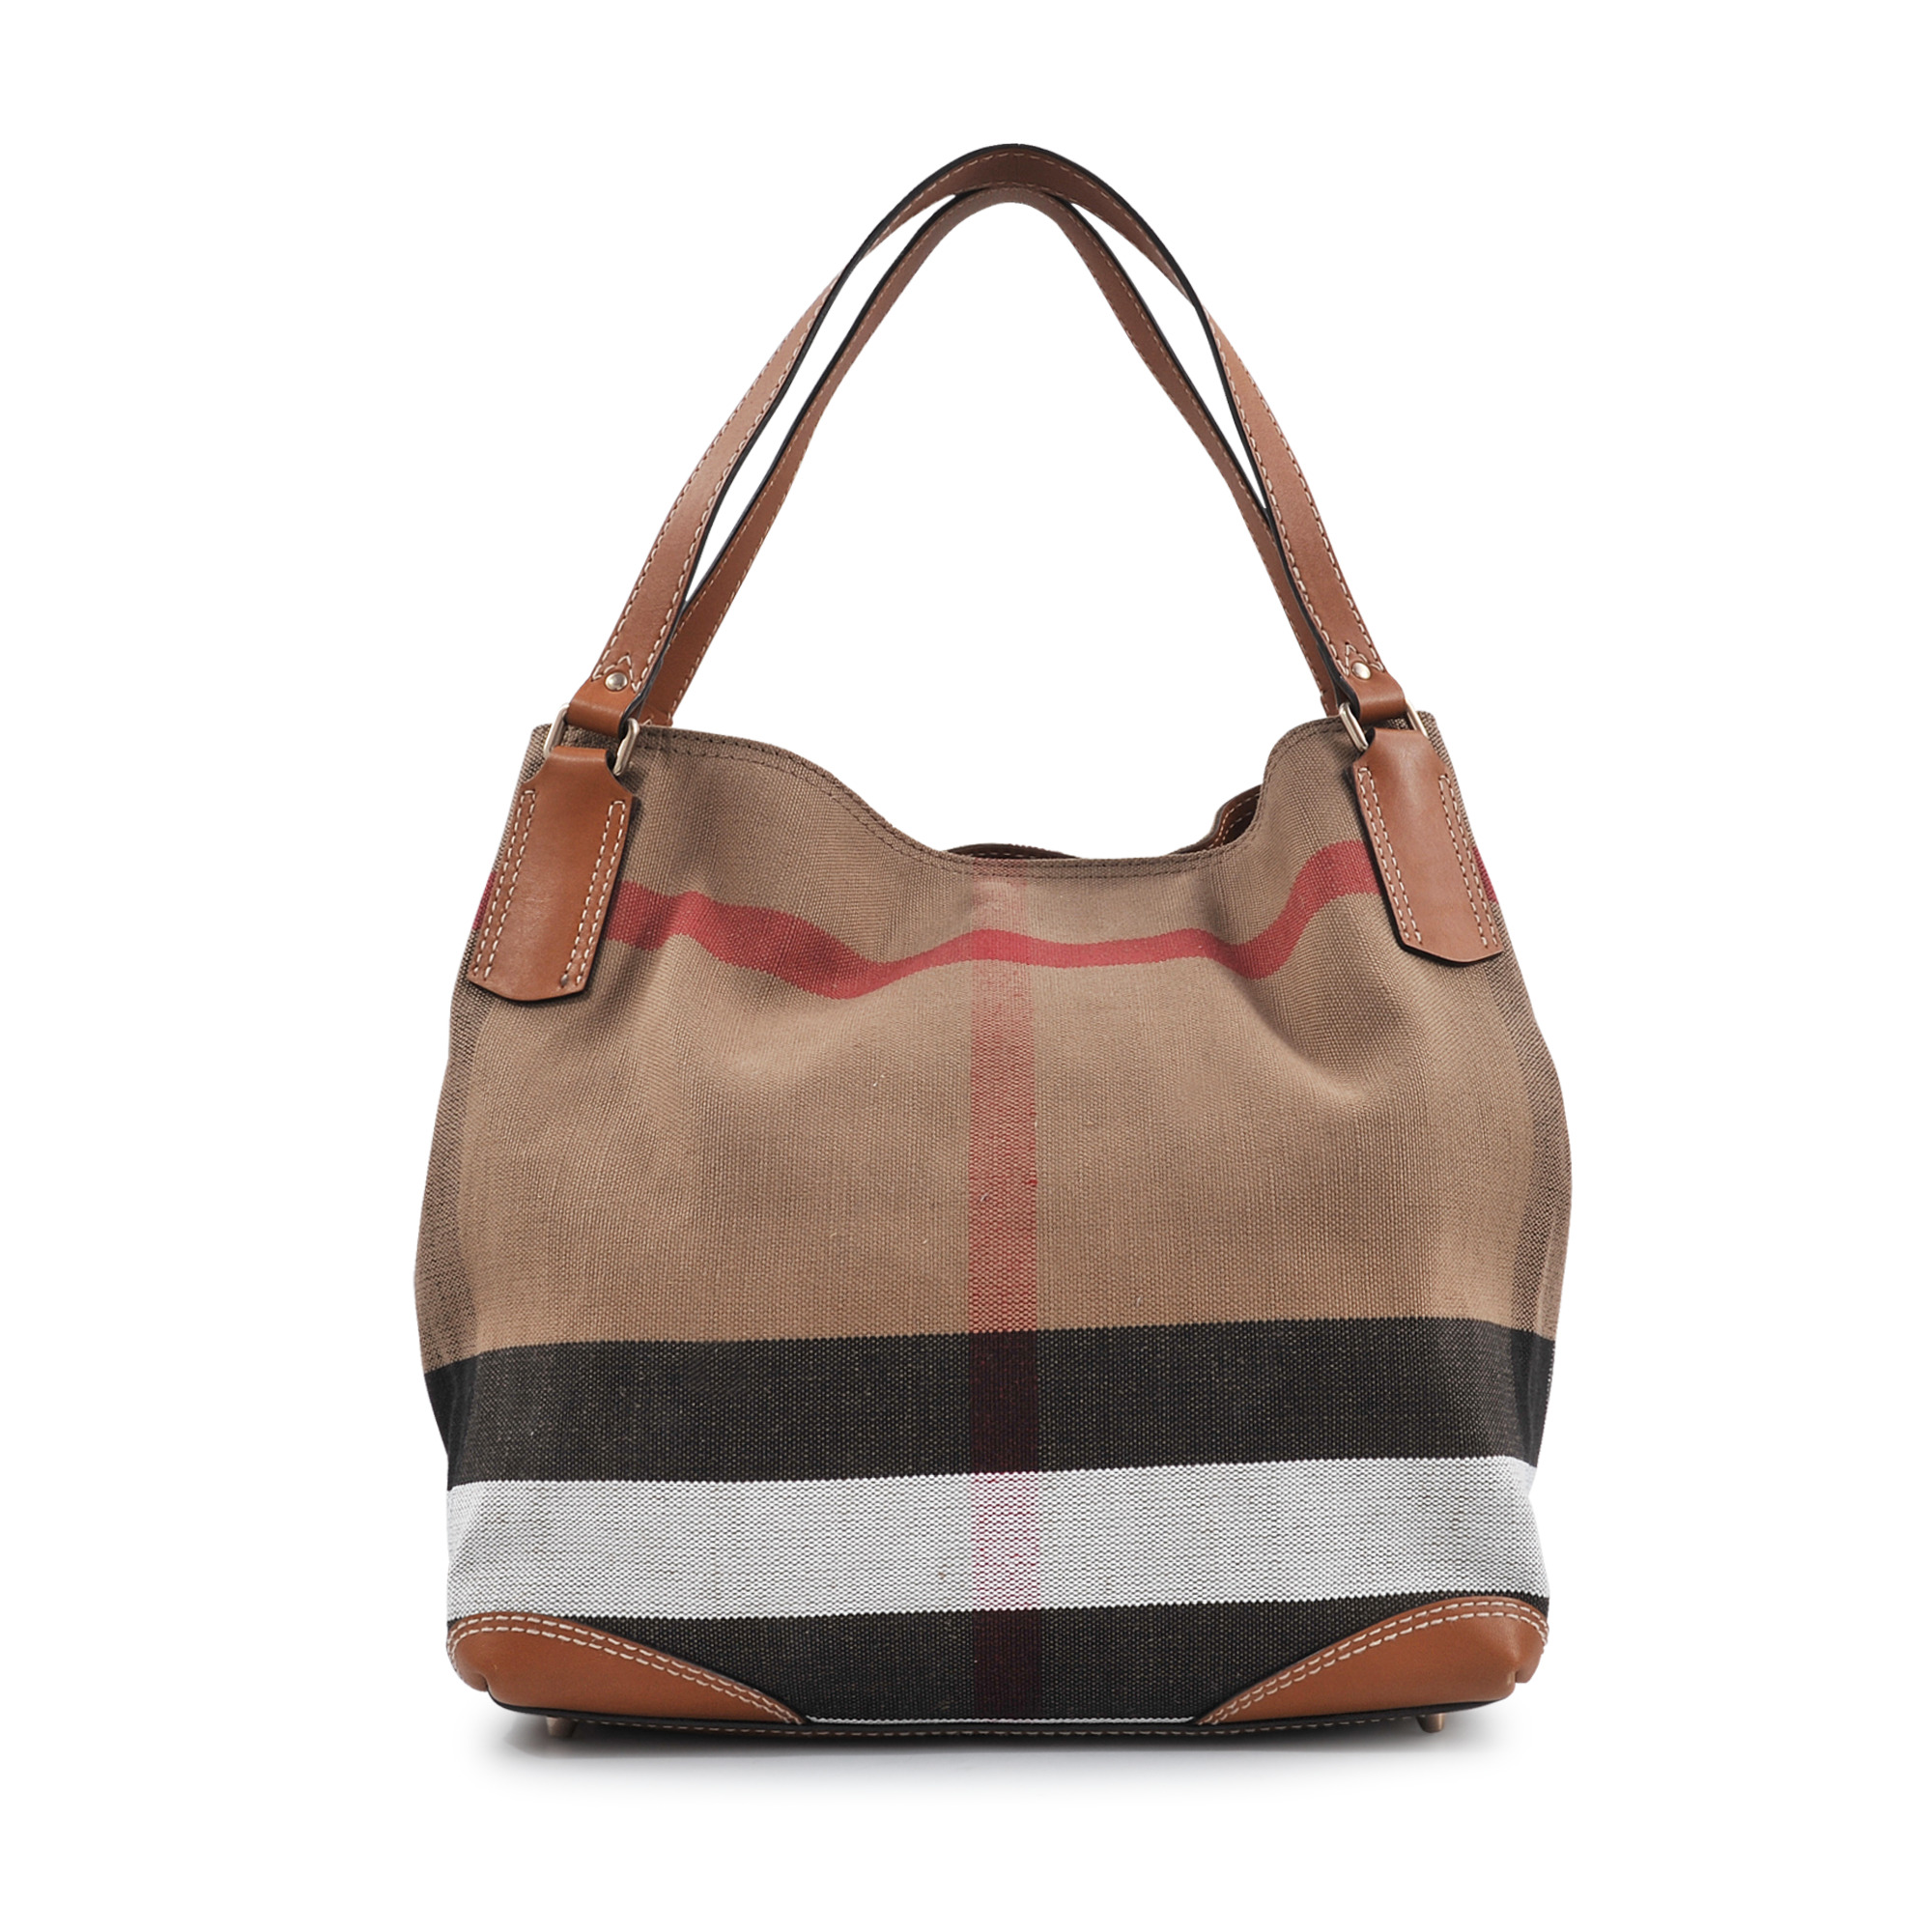 Burberry Sm Maidstone Brit Canvas Bag in Brown | Lyst